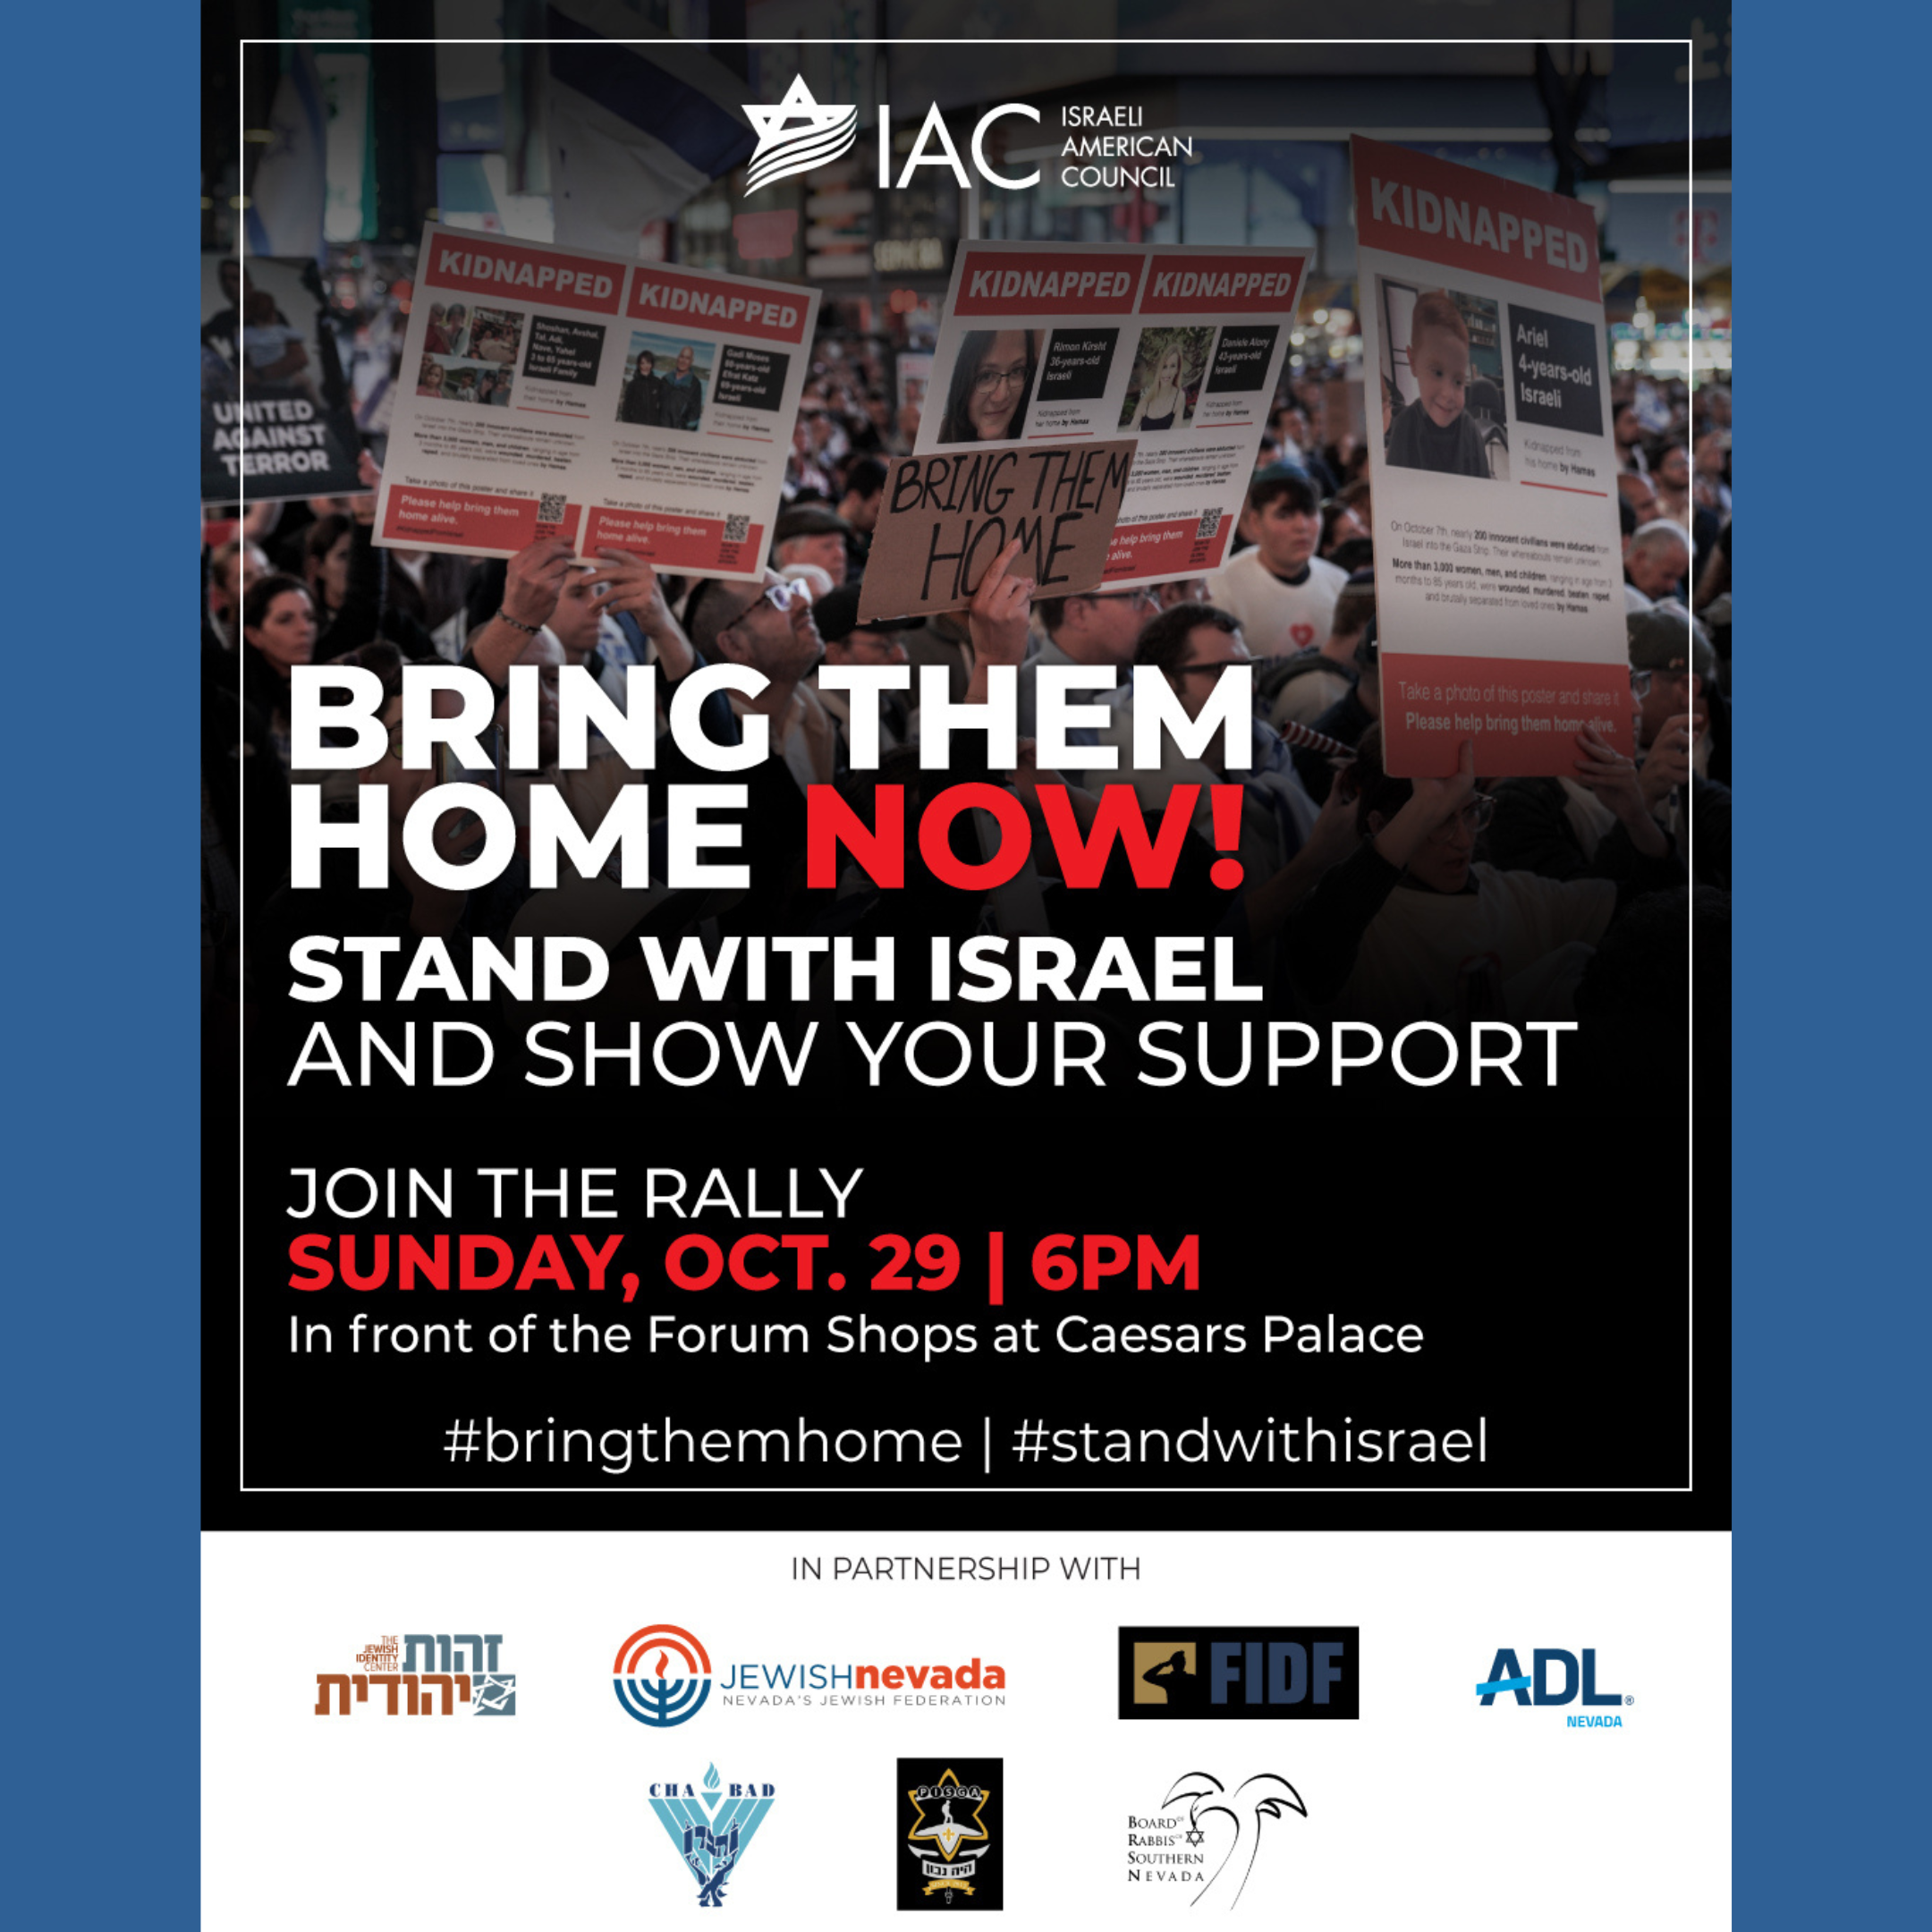 BRING THEM HOME NOW! RALLY